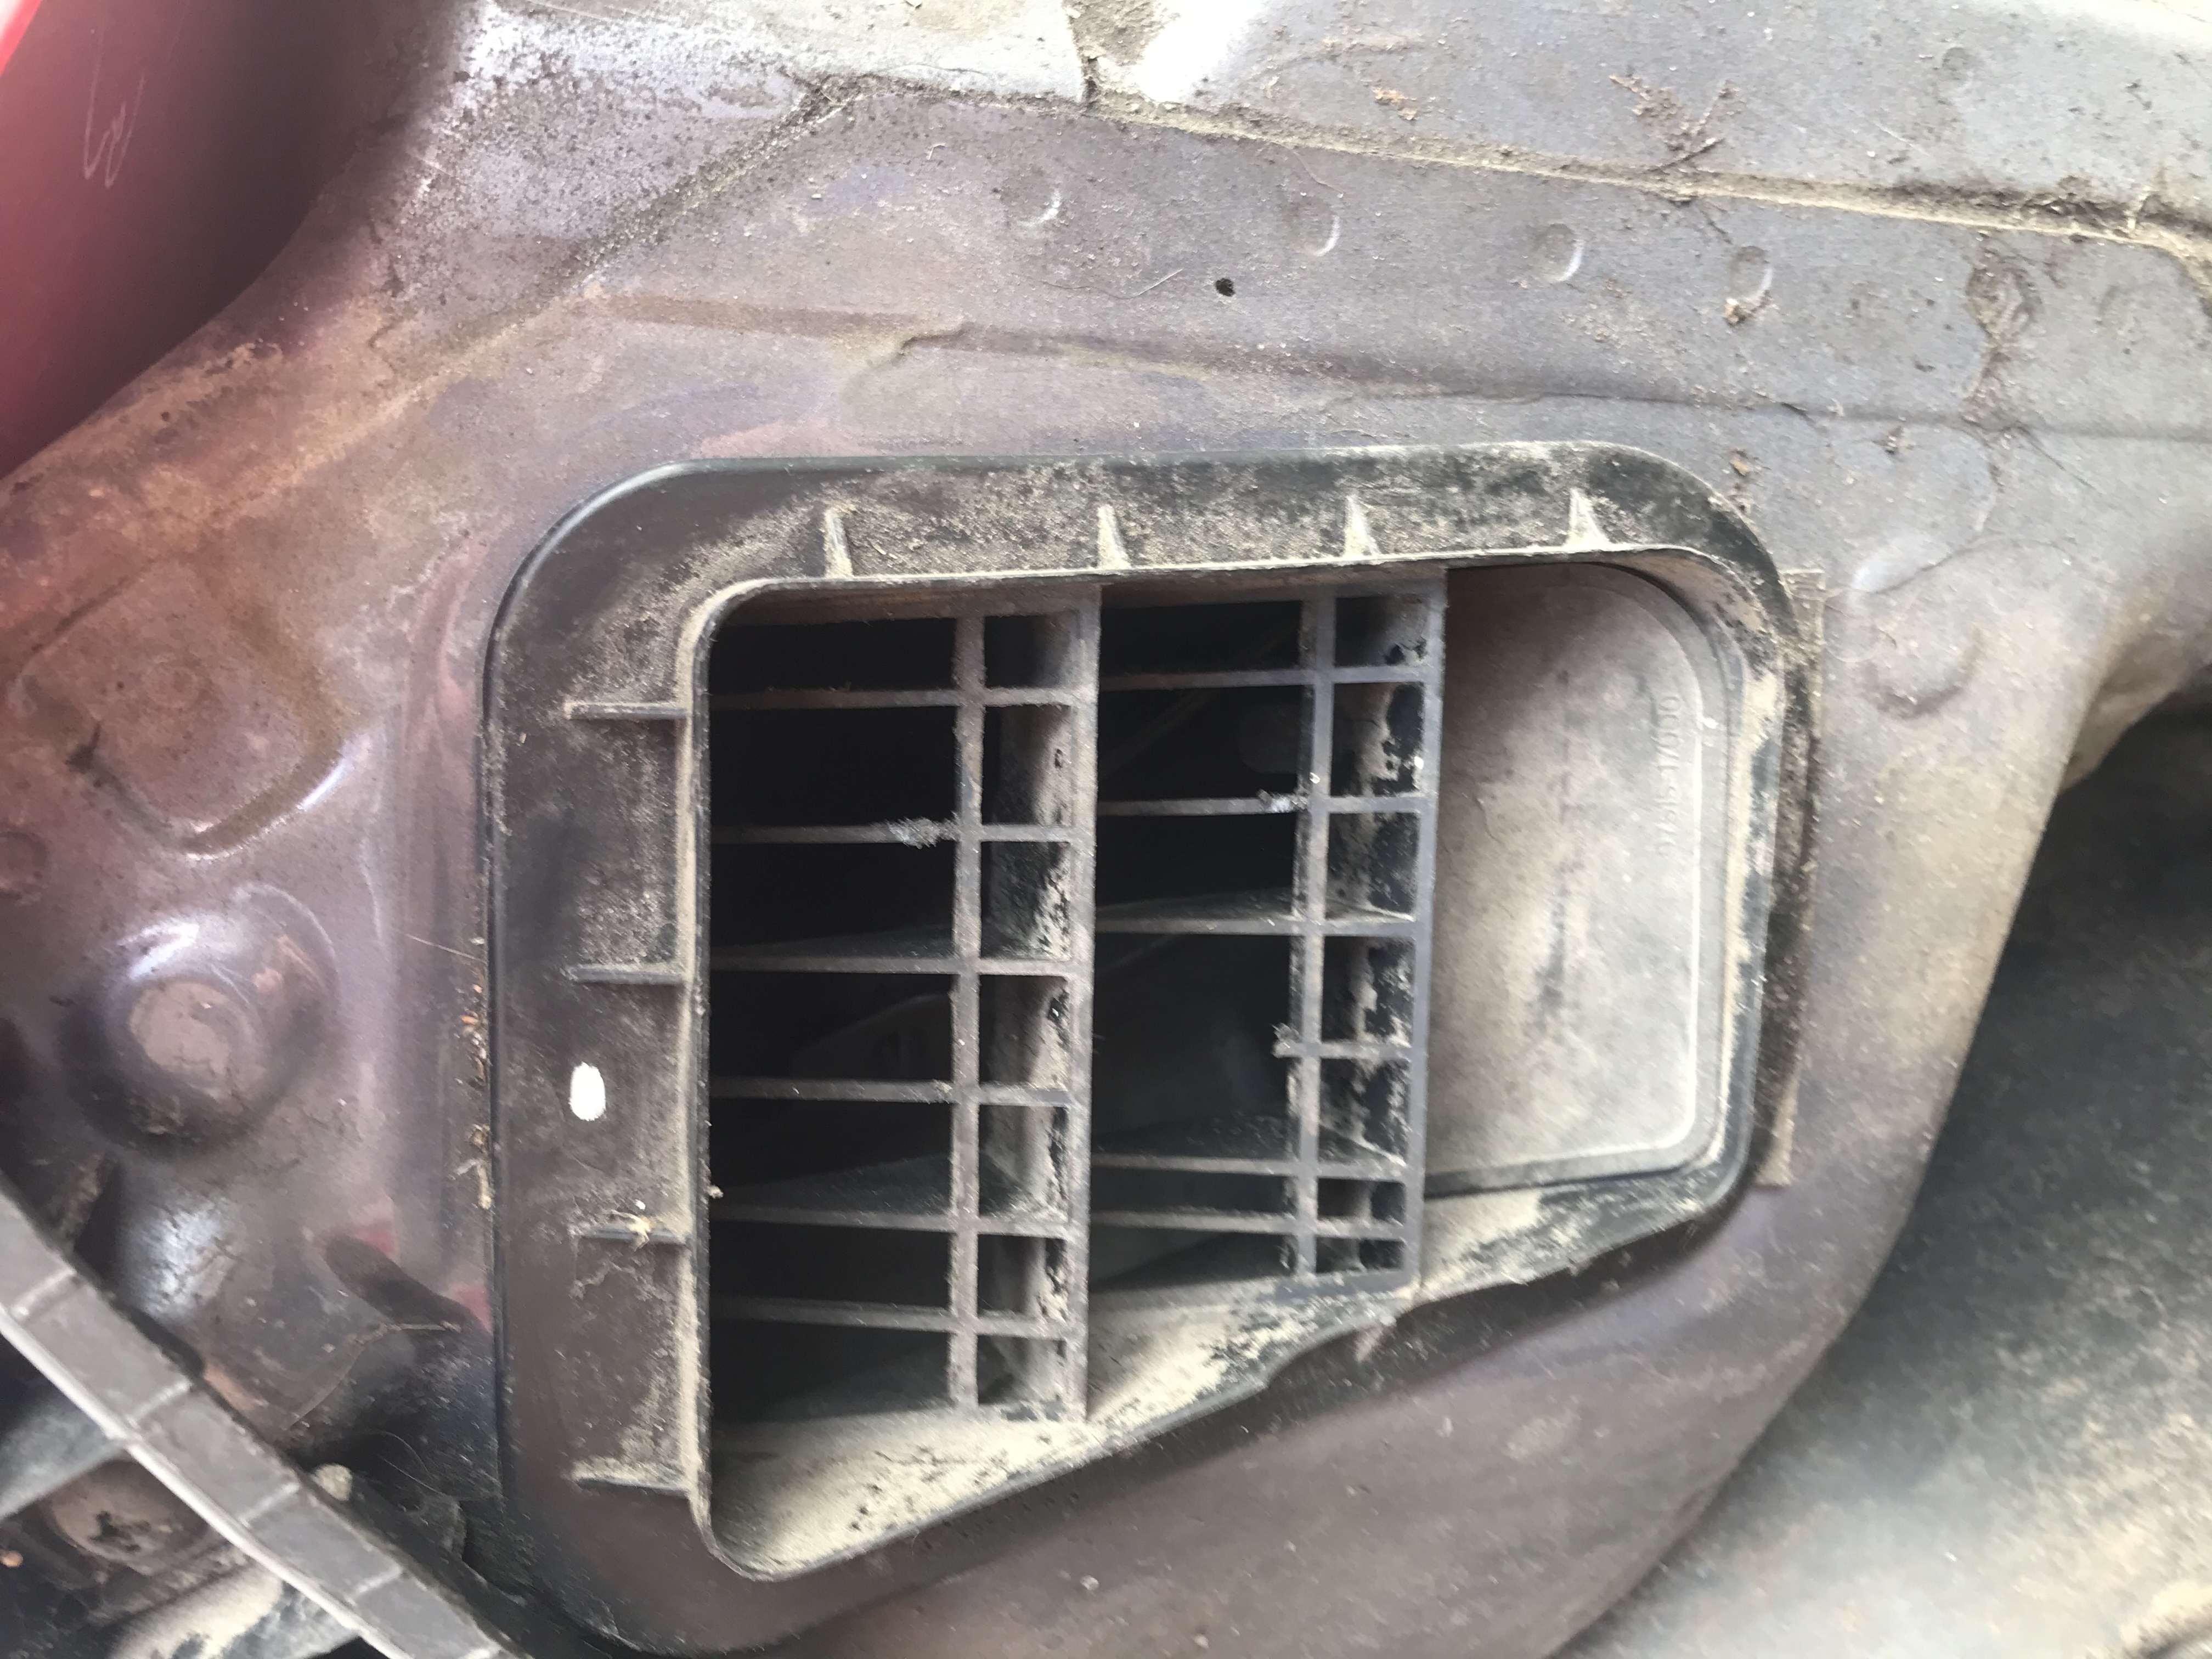 Image for [SOLVED] Hyundai i20 water leak - from roof trim? 